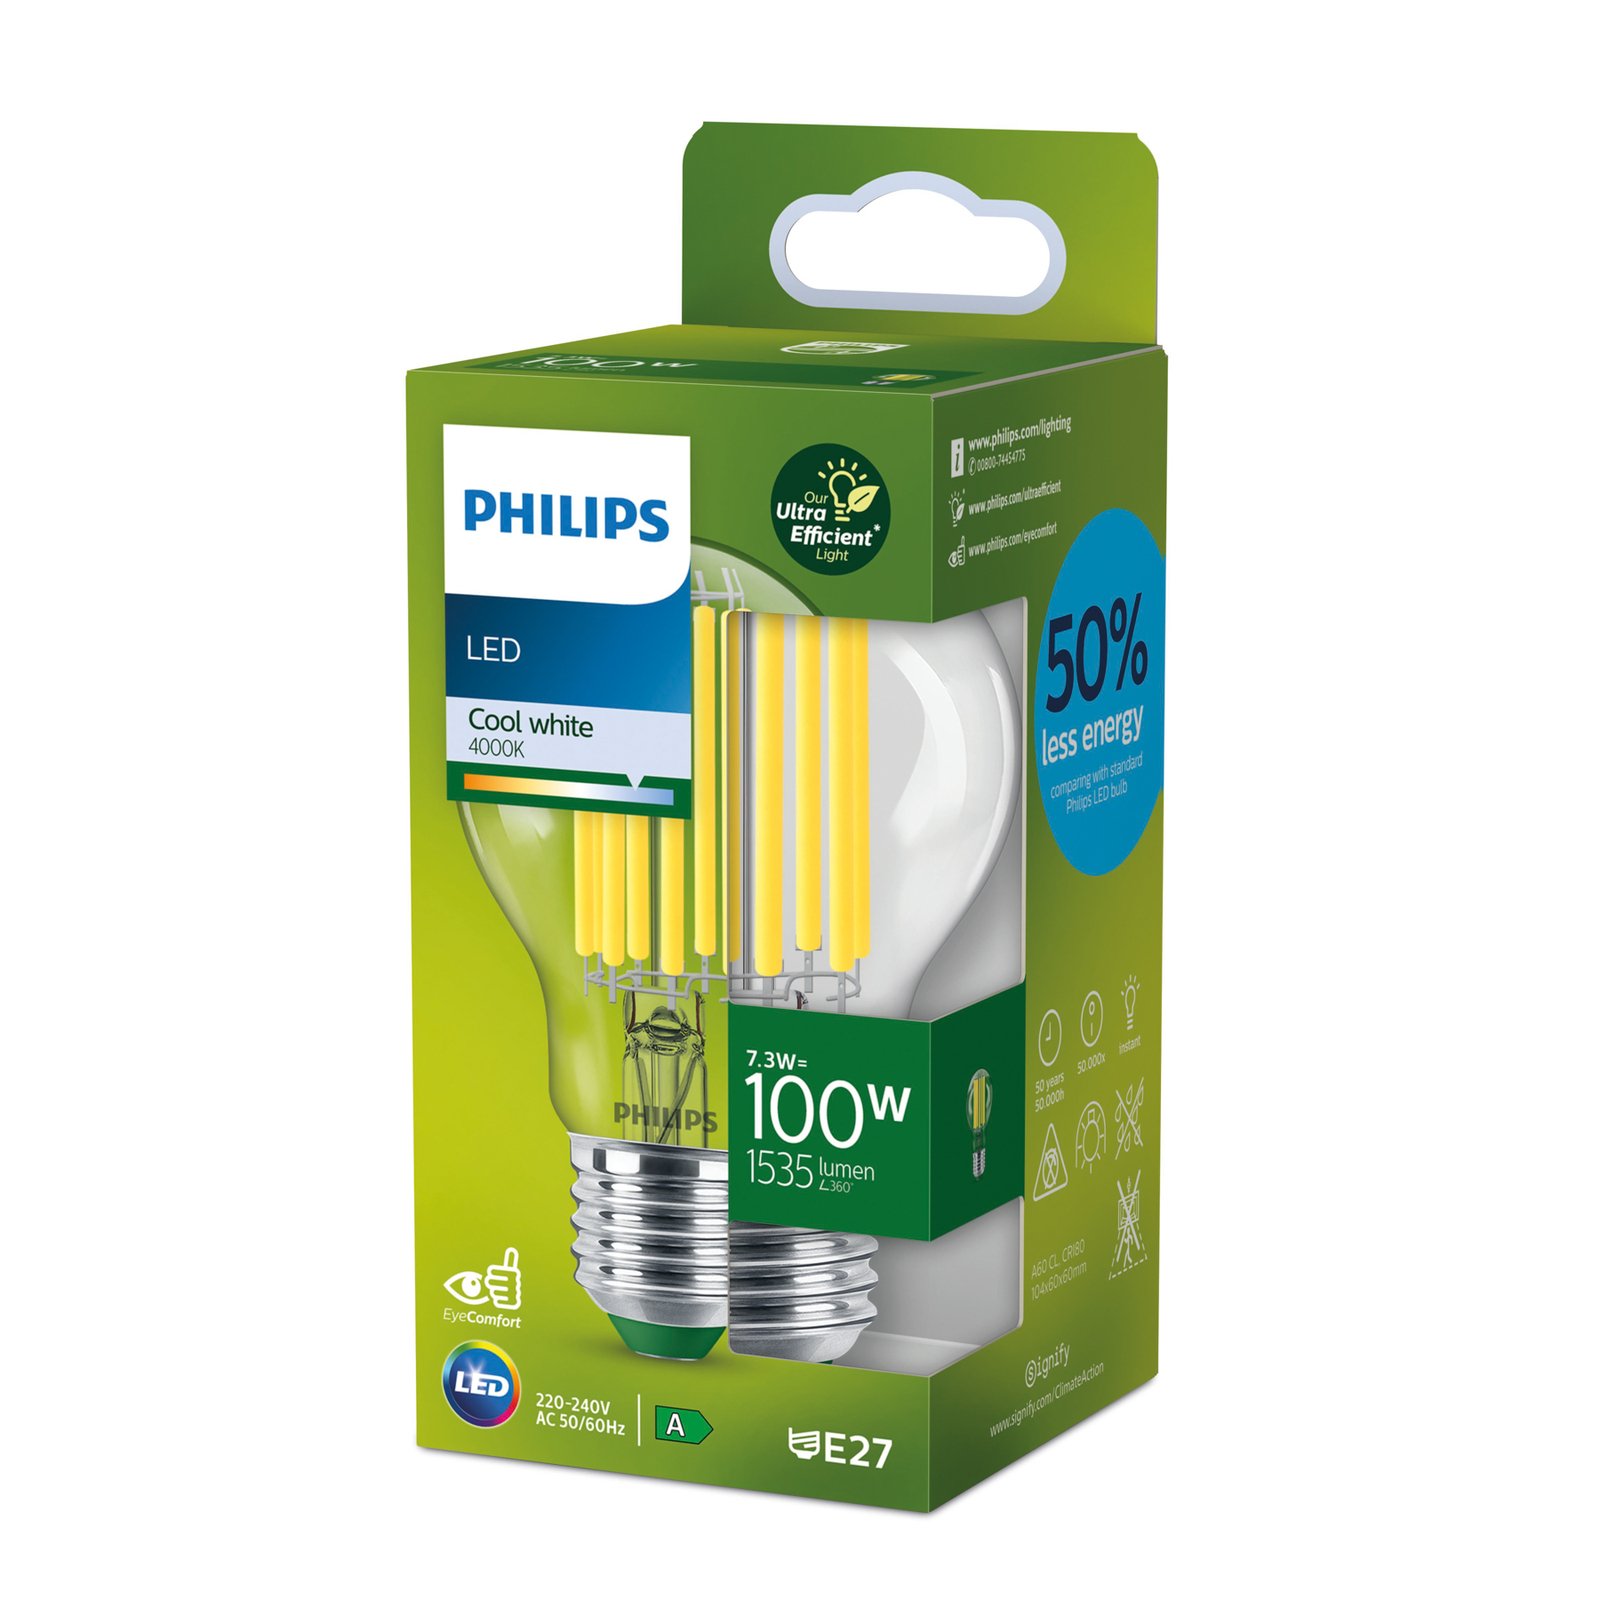 Philips E27 LED A60 7,3W 1535lm 4 000K claire